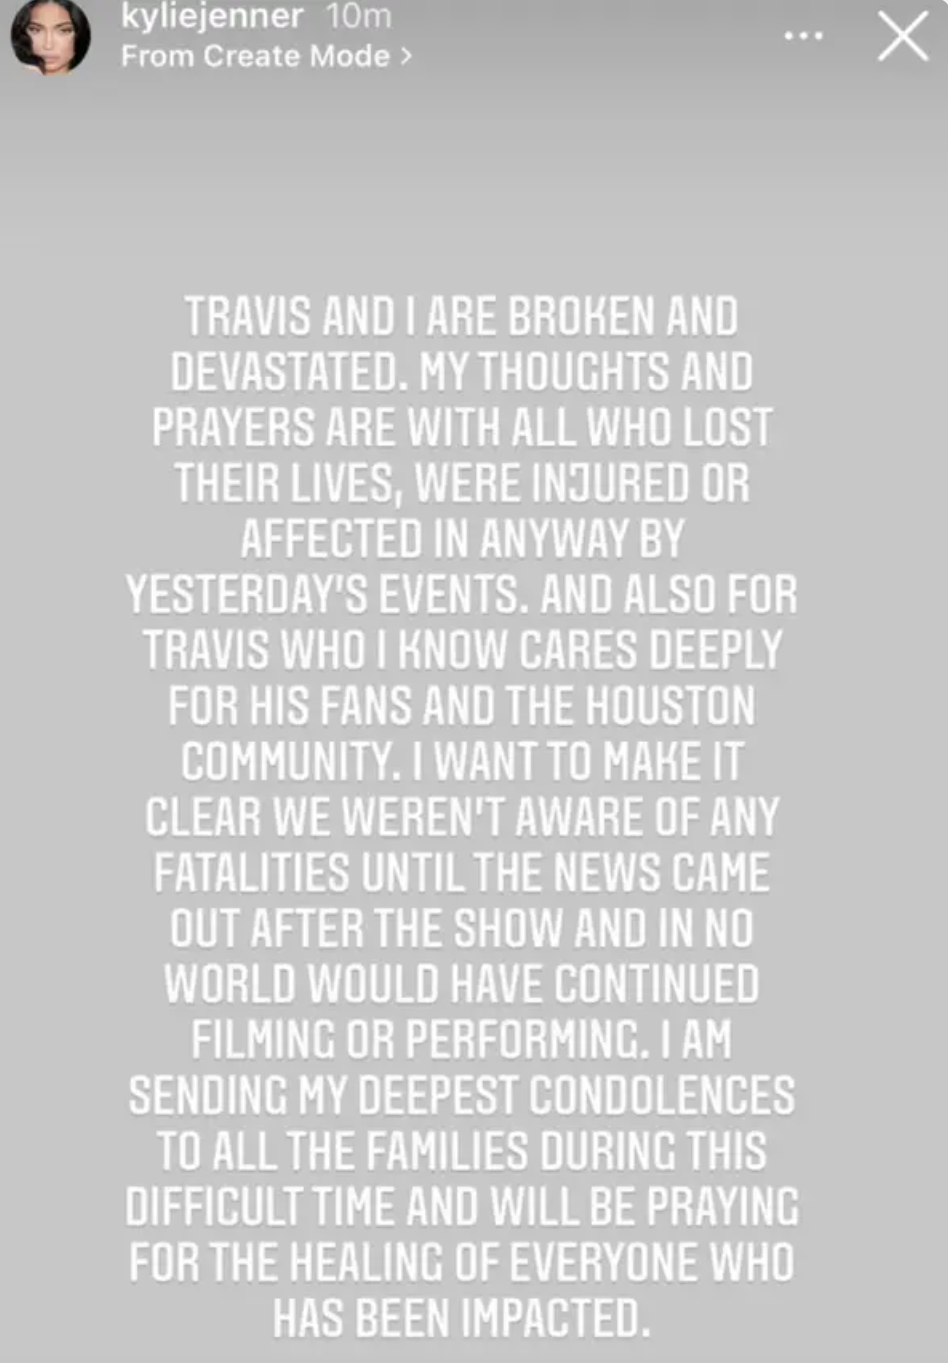 Kylie&#x27;s statement sending condolences and claiming lack of awareness at the time